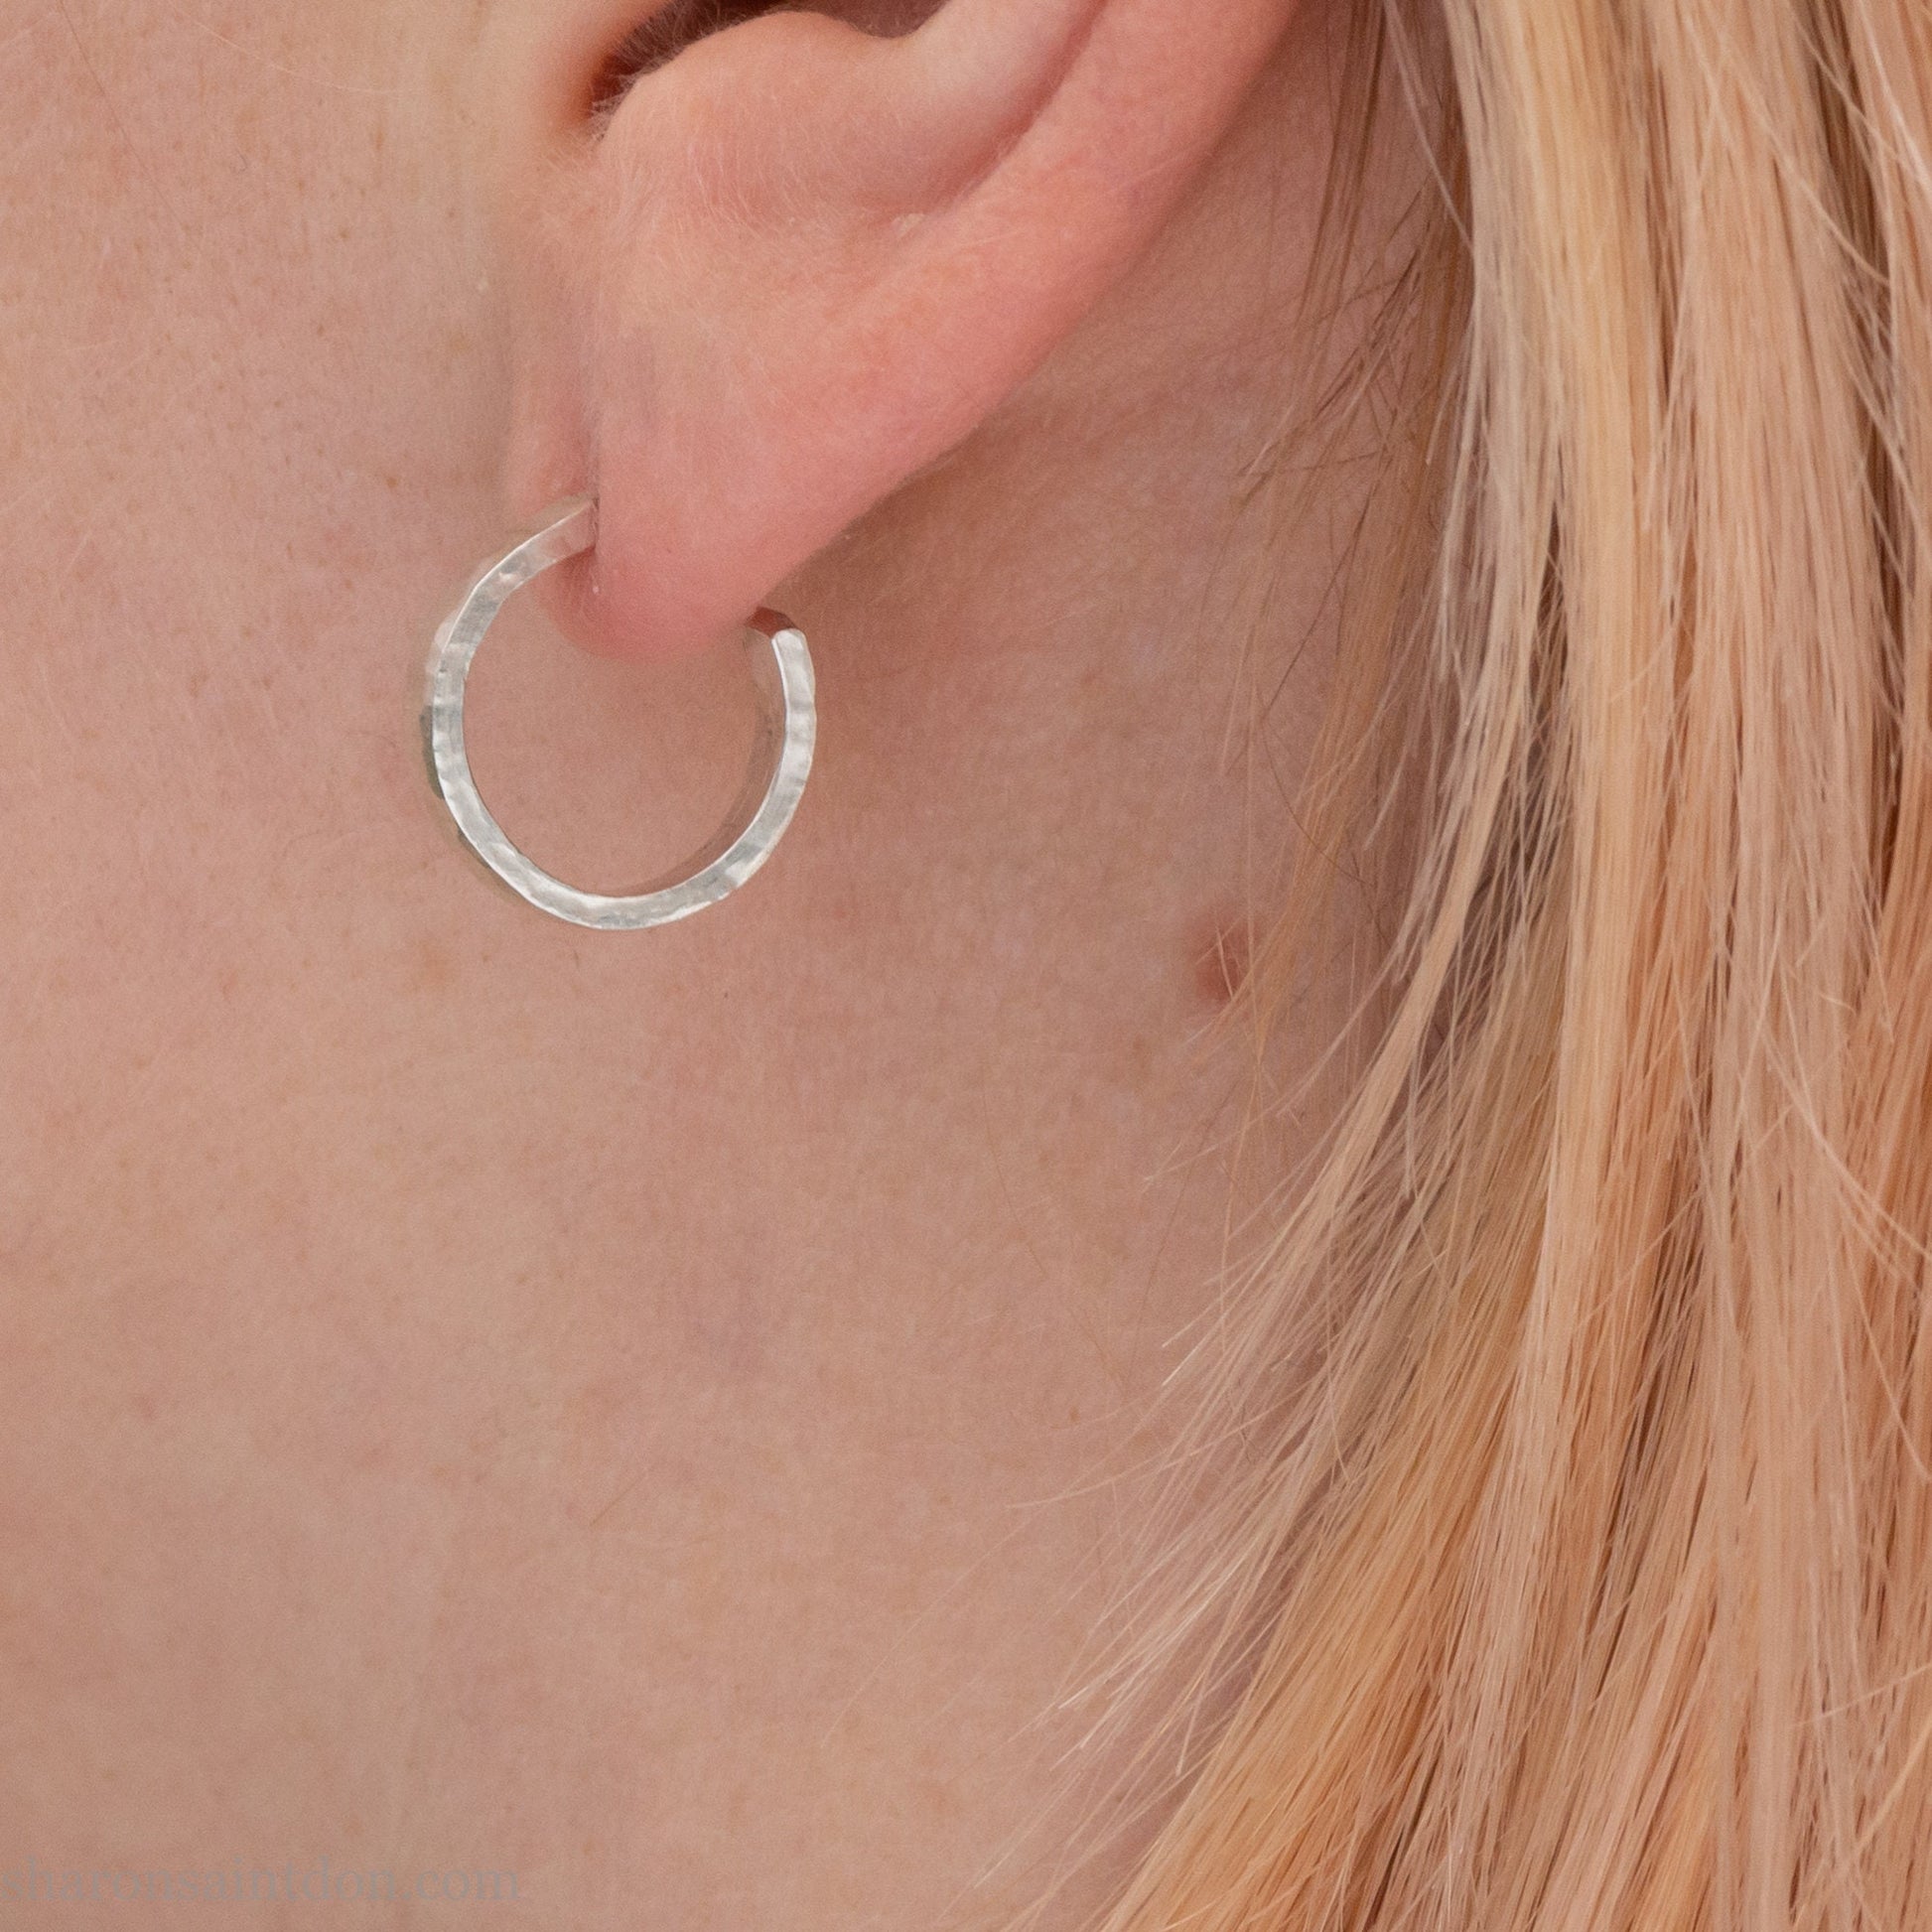 14mm x 3mm small sterling silver hoop earrings, handmade in North America by Sharon SaintDon. Hammered texture, solid silver with silver posts and backs for men or women, unisex.